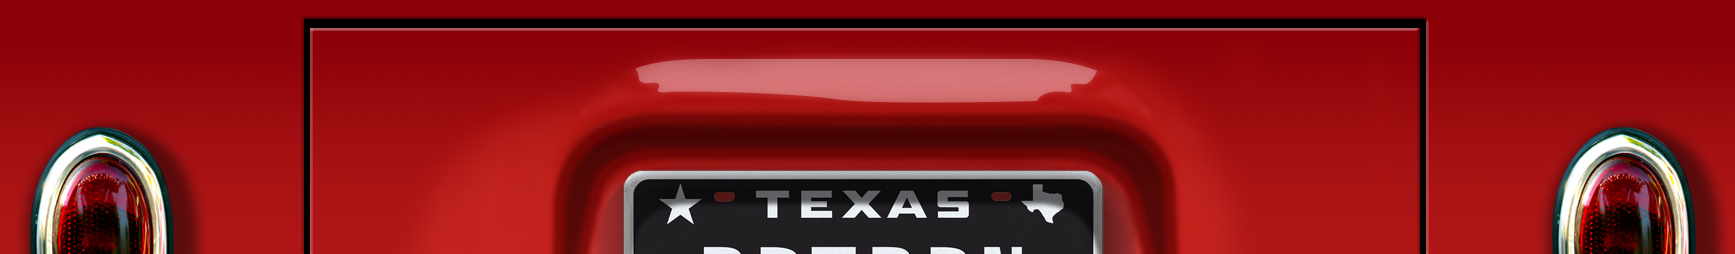 Red Van Creative Design and Marketing Texas Marketing Solutions